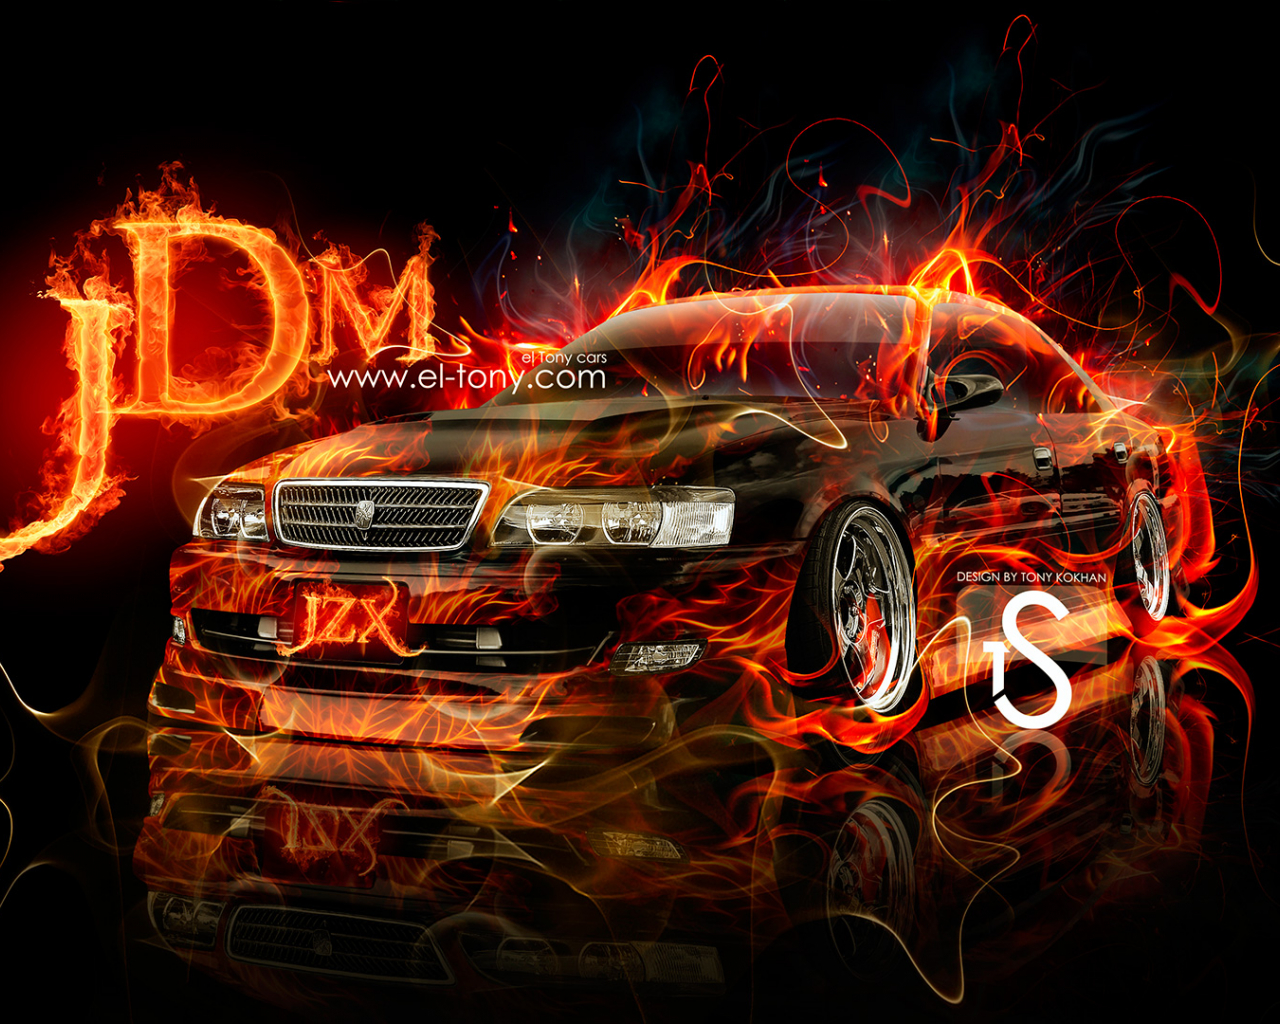 Free download chaser jzx100 jdm side fire abstract car 2014 toyota